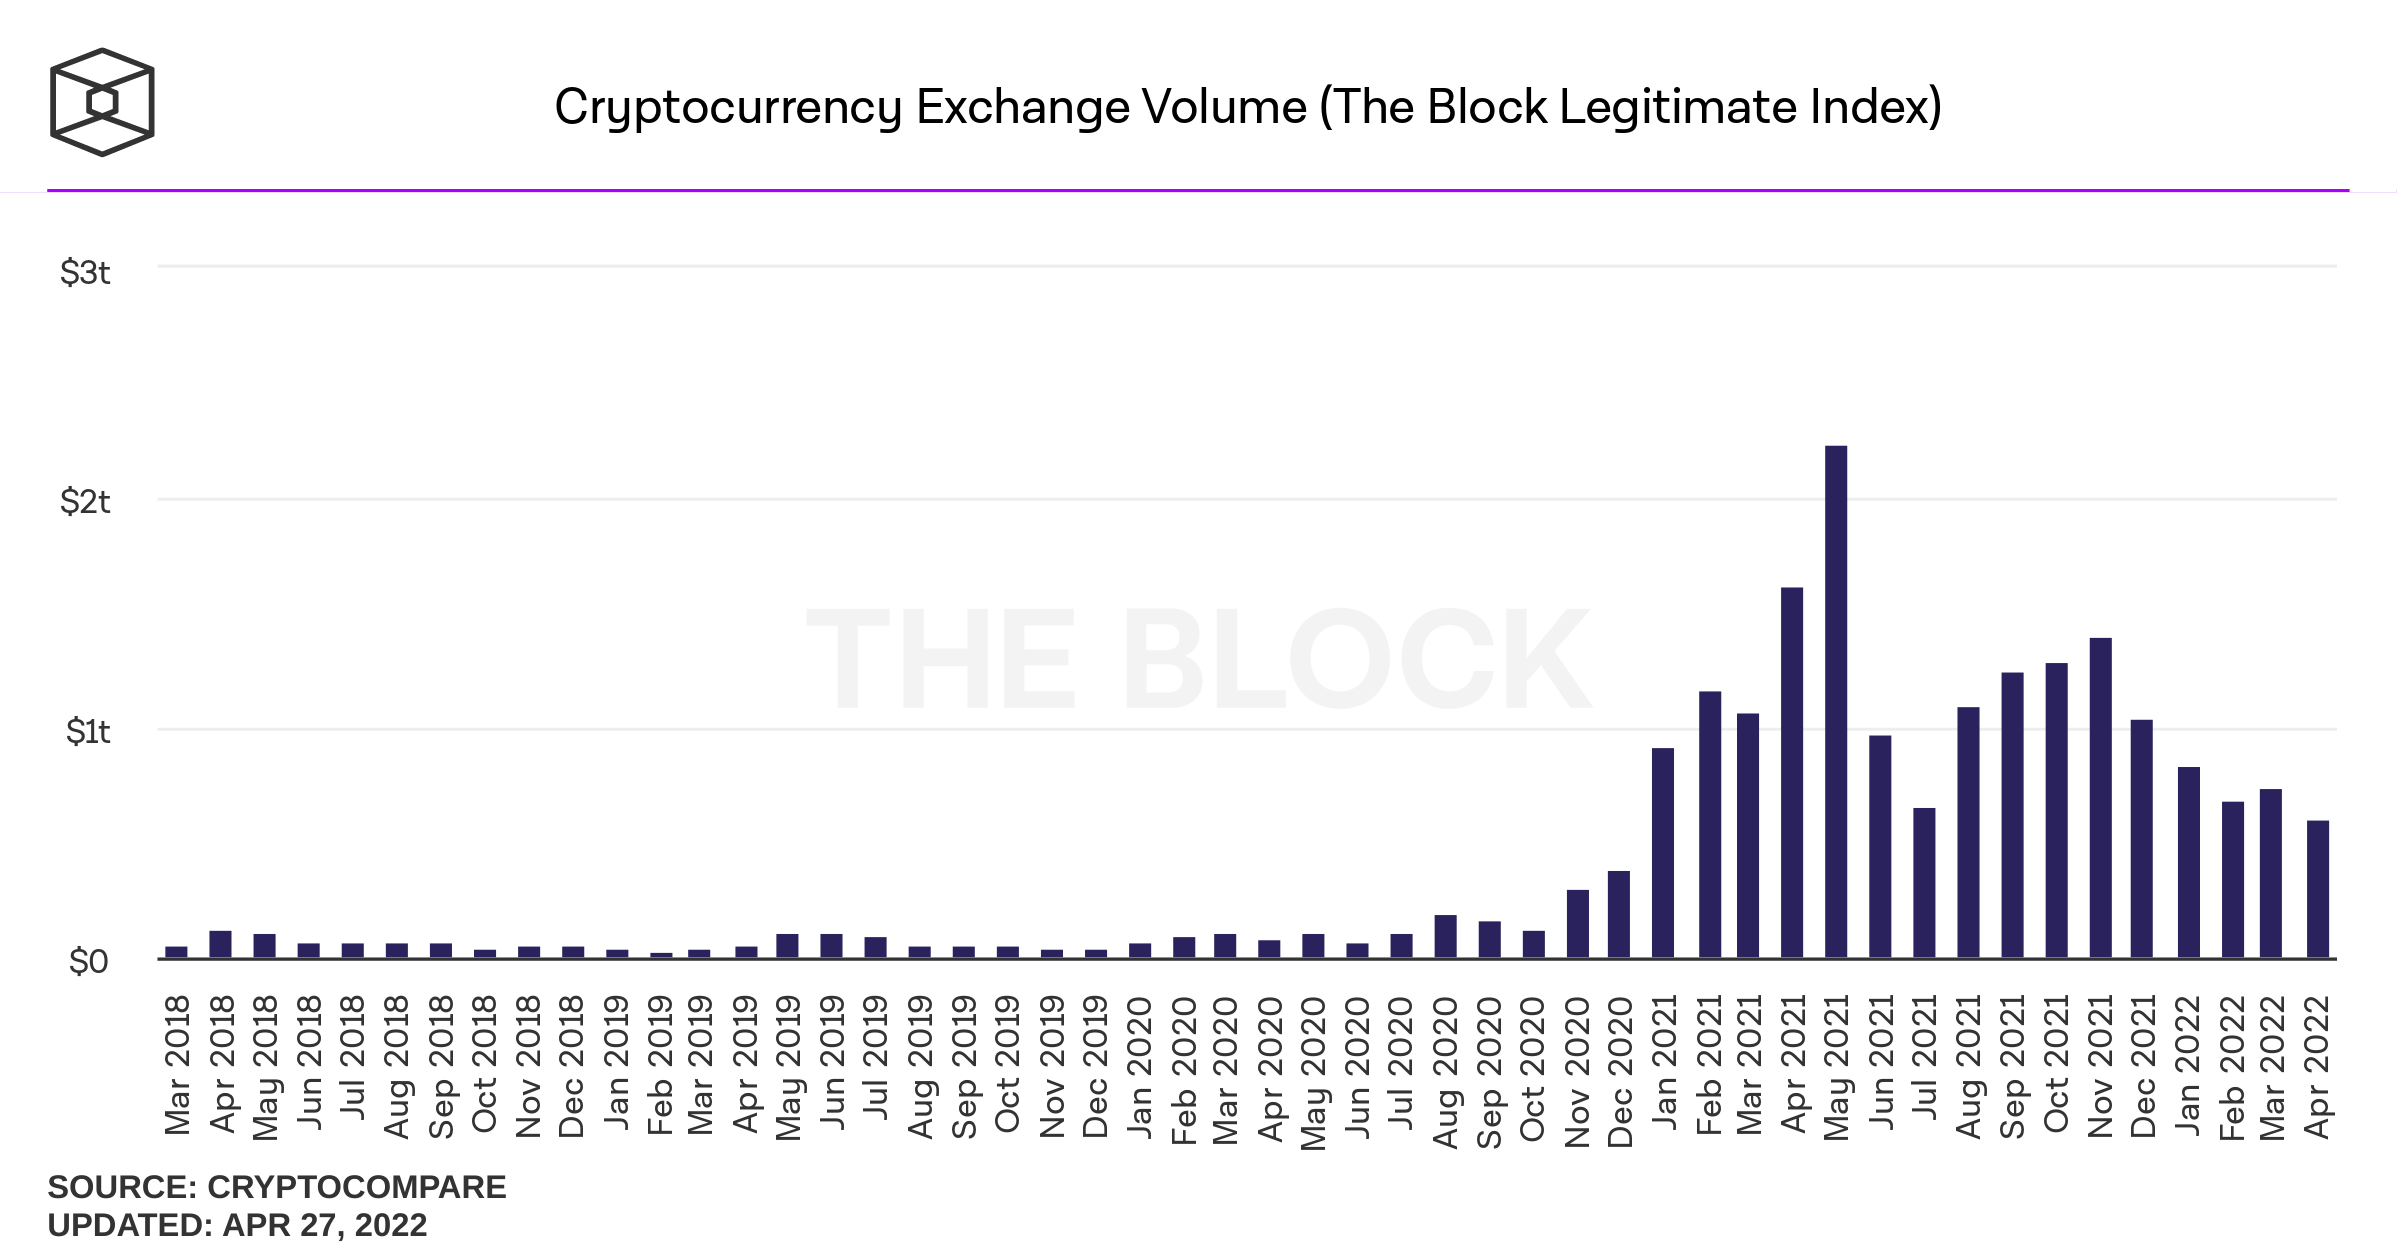 Derivatives, Spot Markets, Dex Swaps — 30 Day Crypto Trade Volumes Slipped Across the Board Last Month